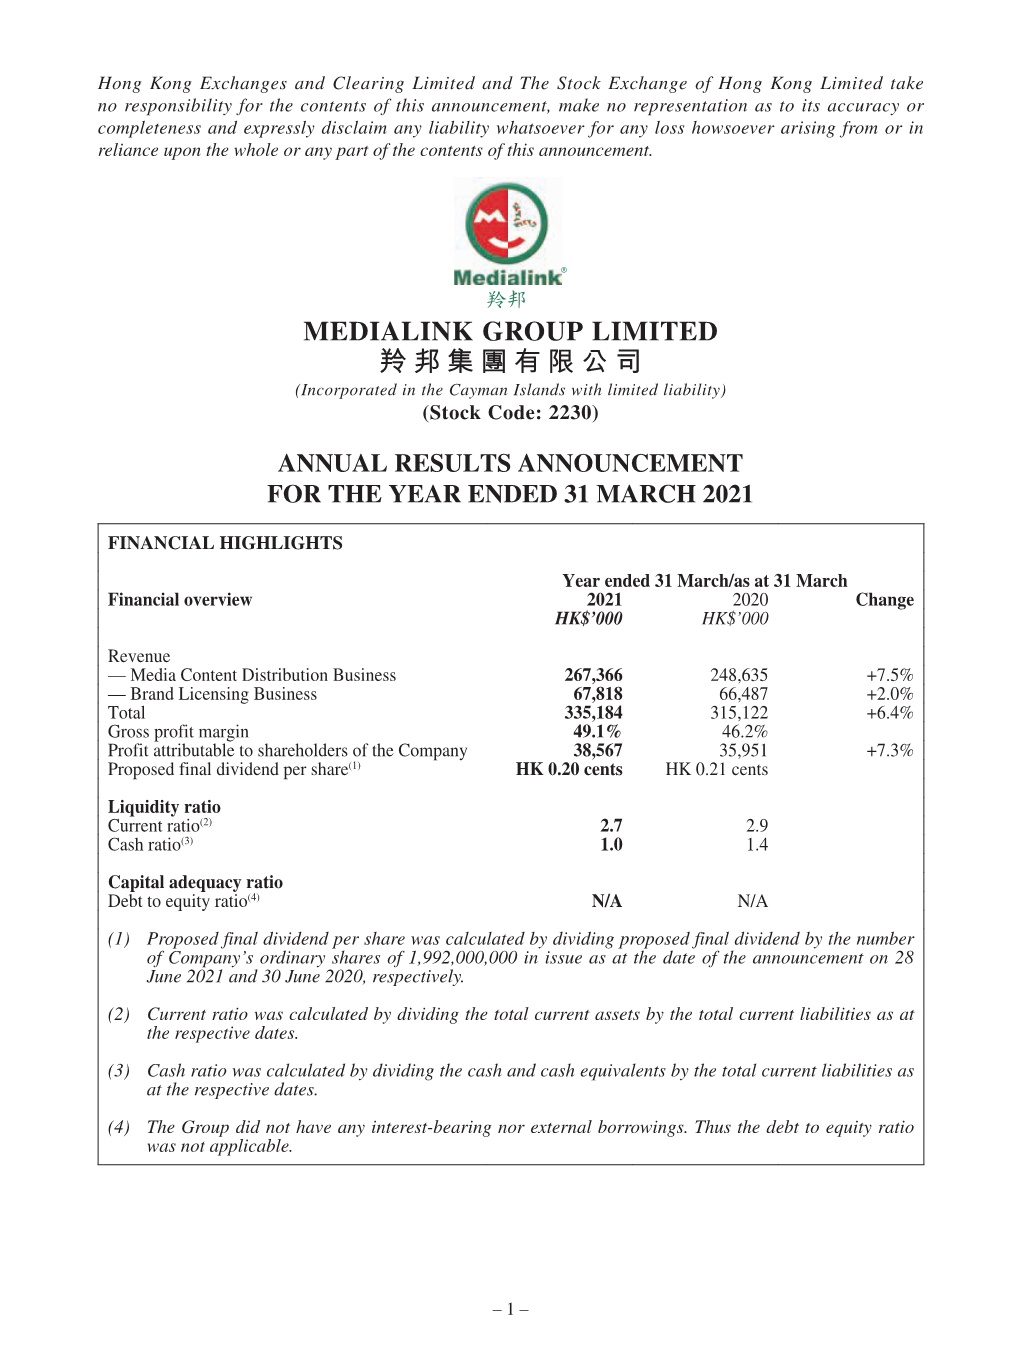 MEDIALINK GROUP LIMITED 羚邦集團有限公司 (Incorporated in the Cayman Islands with Limited Liability) (Stock Code: 2230)